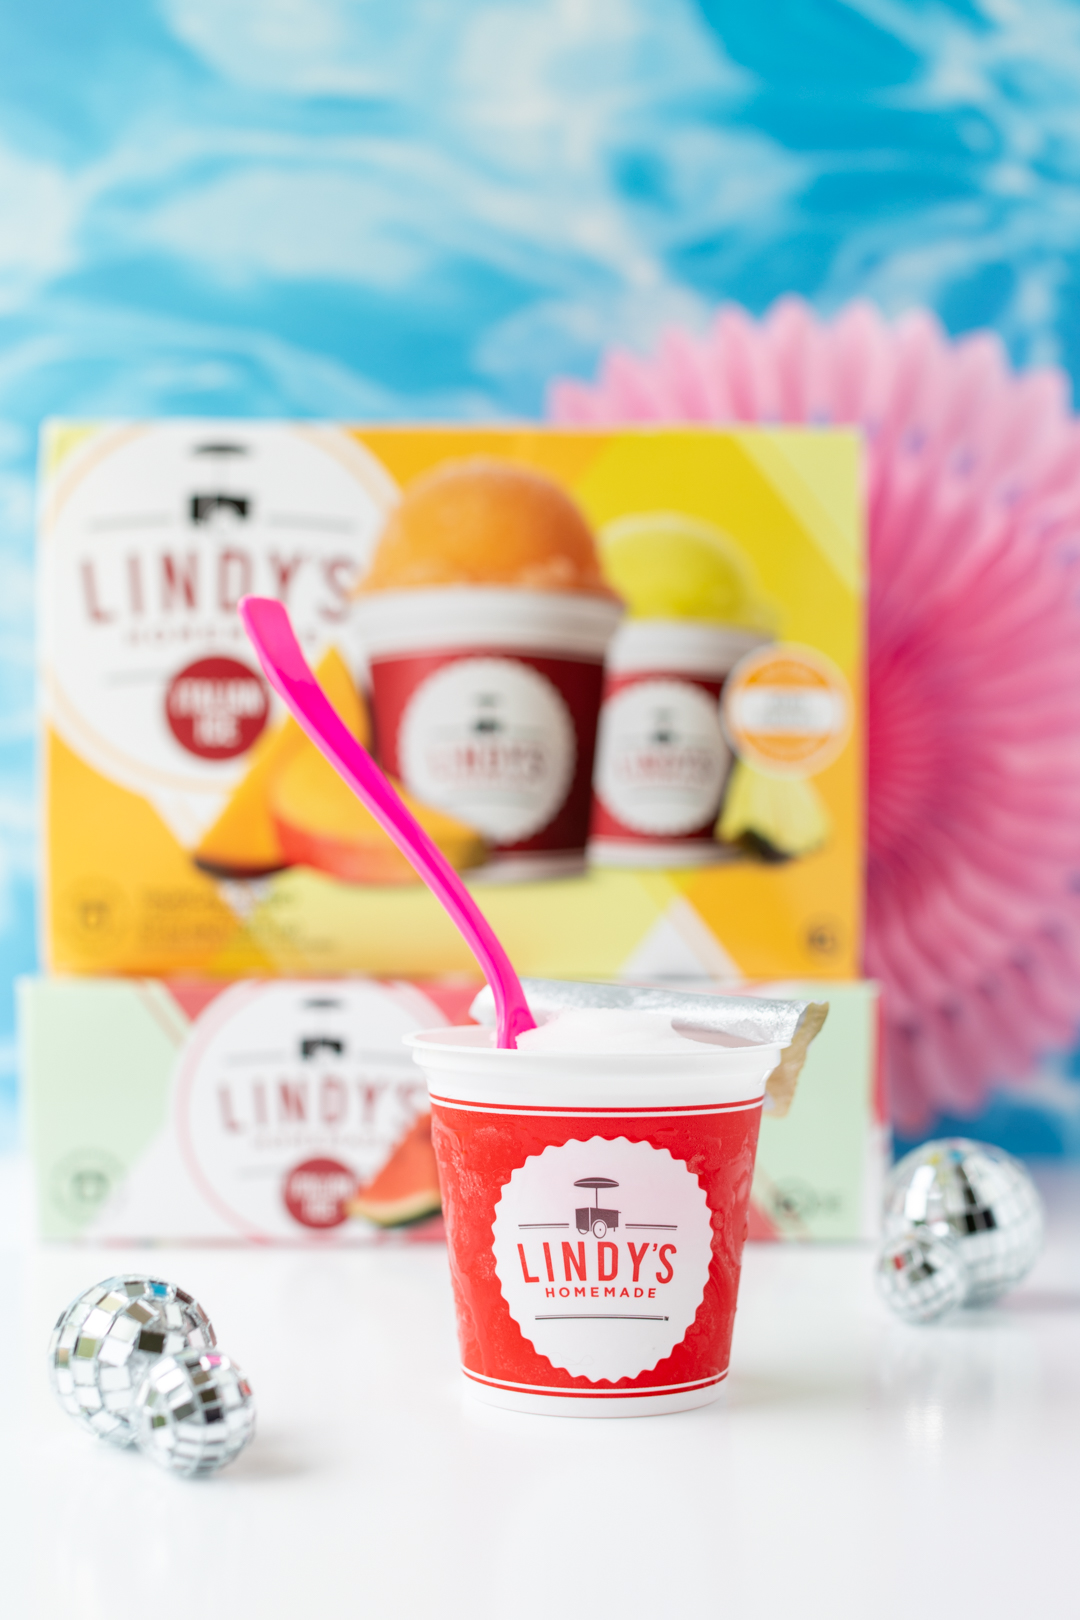 lindy's homemade italian ice packages and single serve container